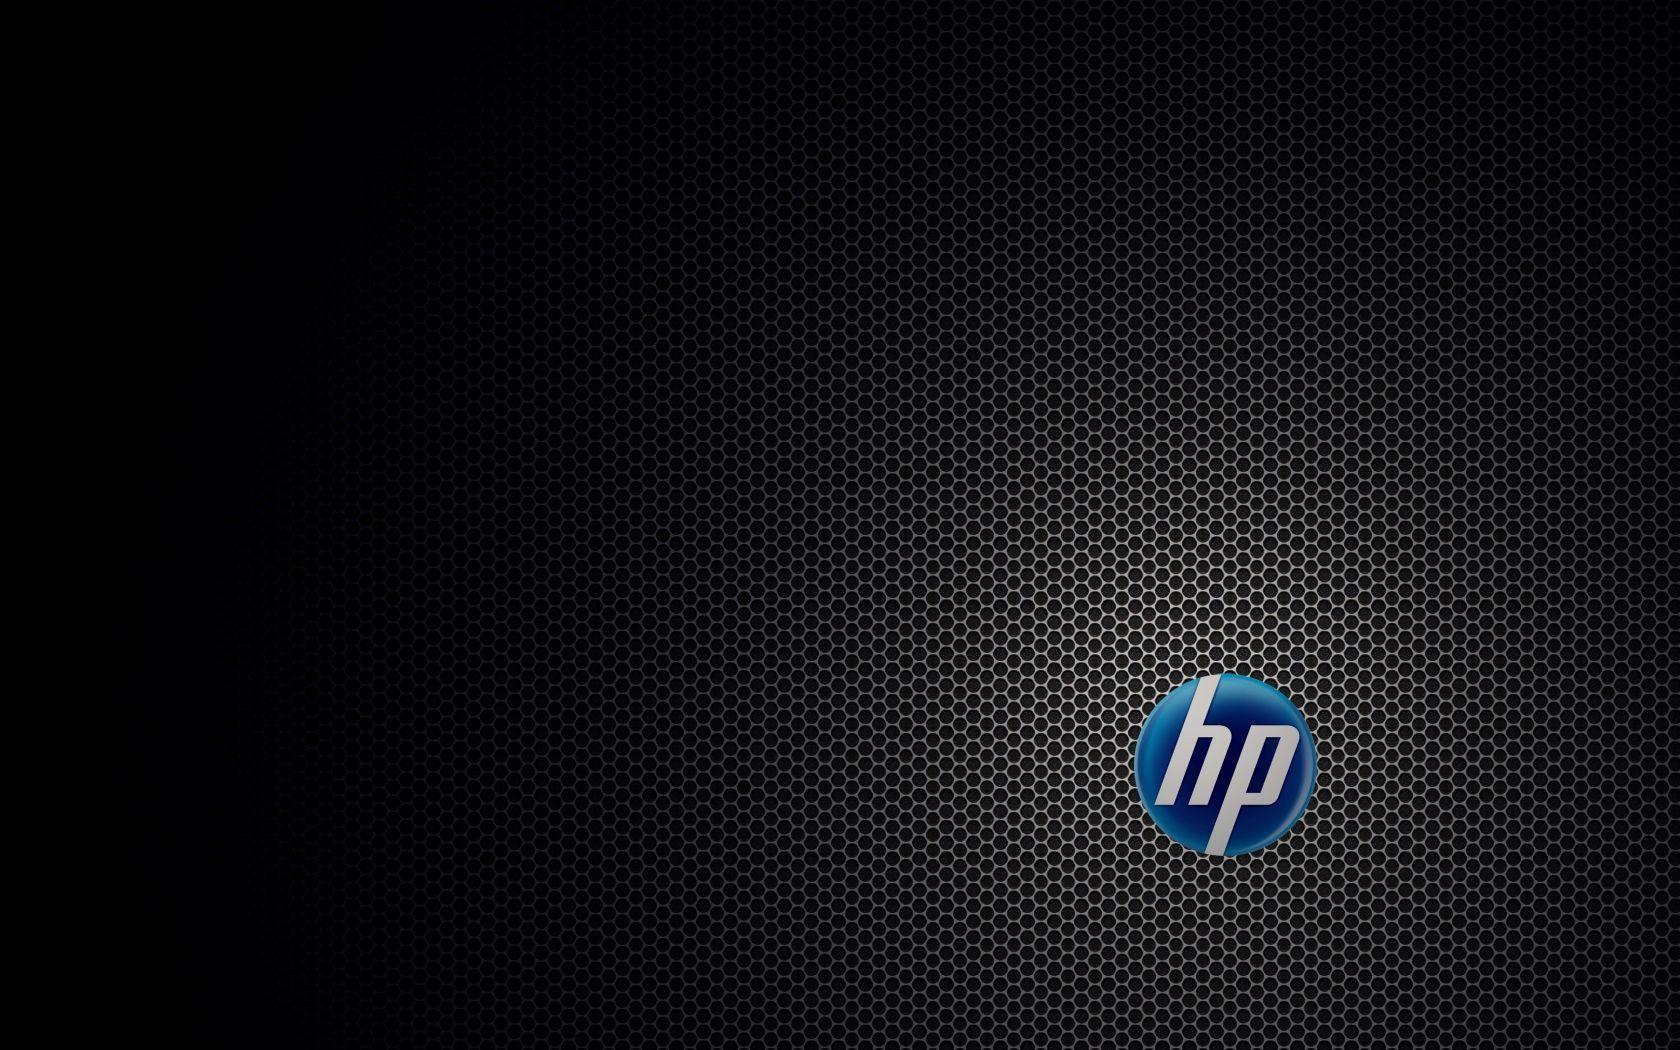 HP Pavilion Wallpapers - Wallpaper Cave